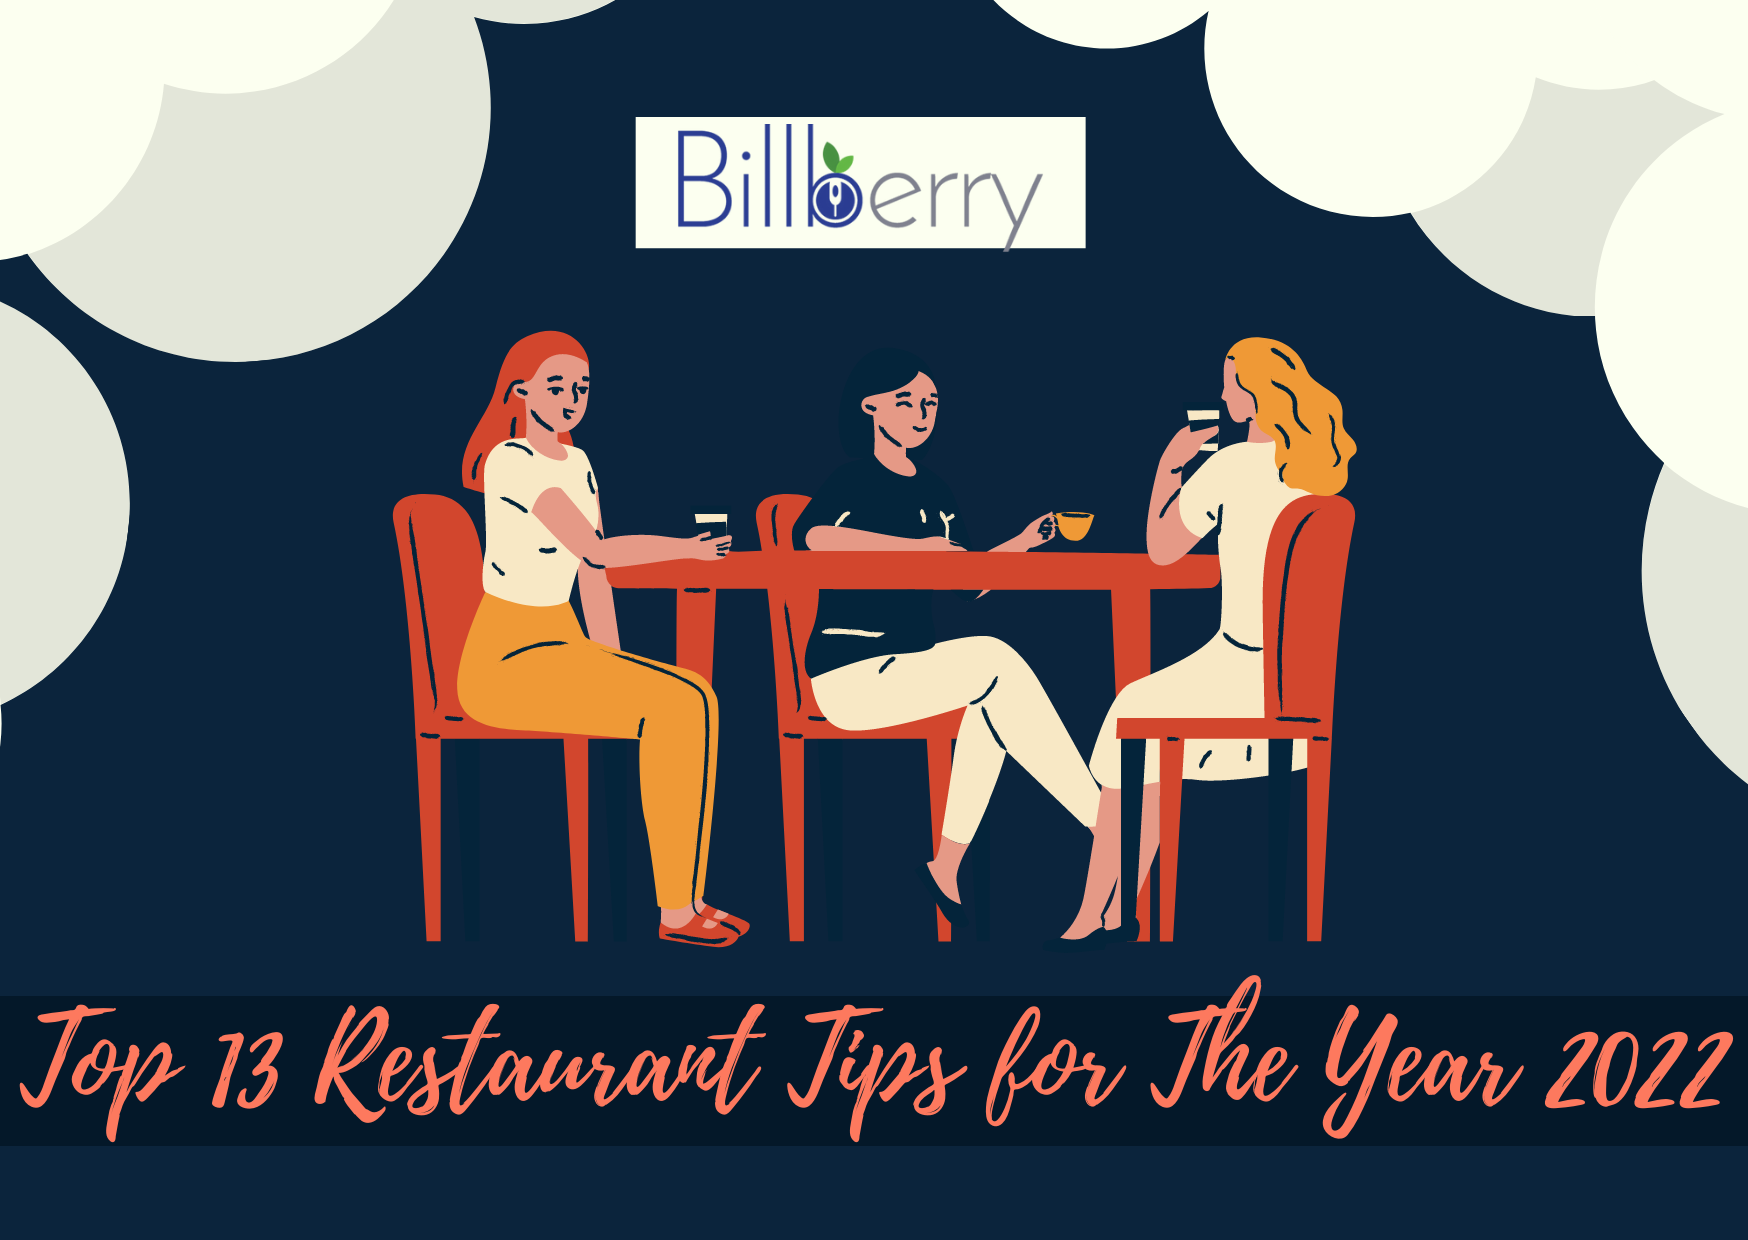 Top 13 Restaurant Tips for The Year 2022